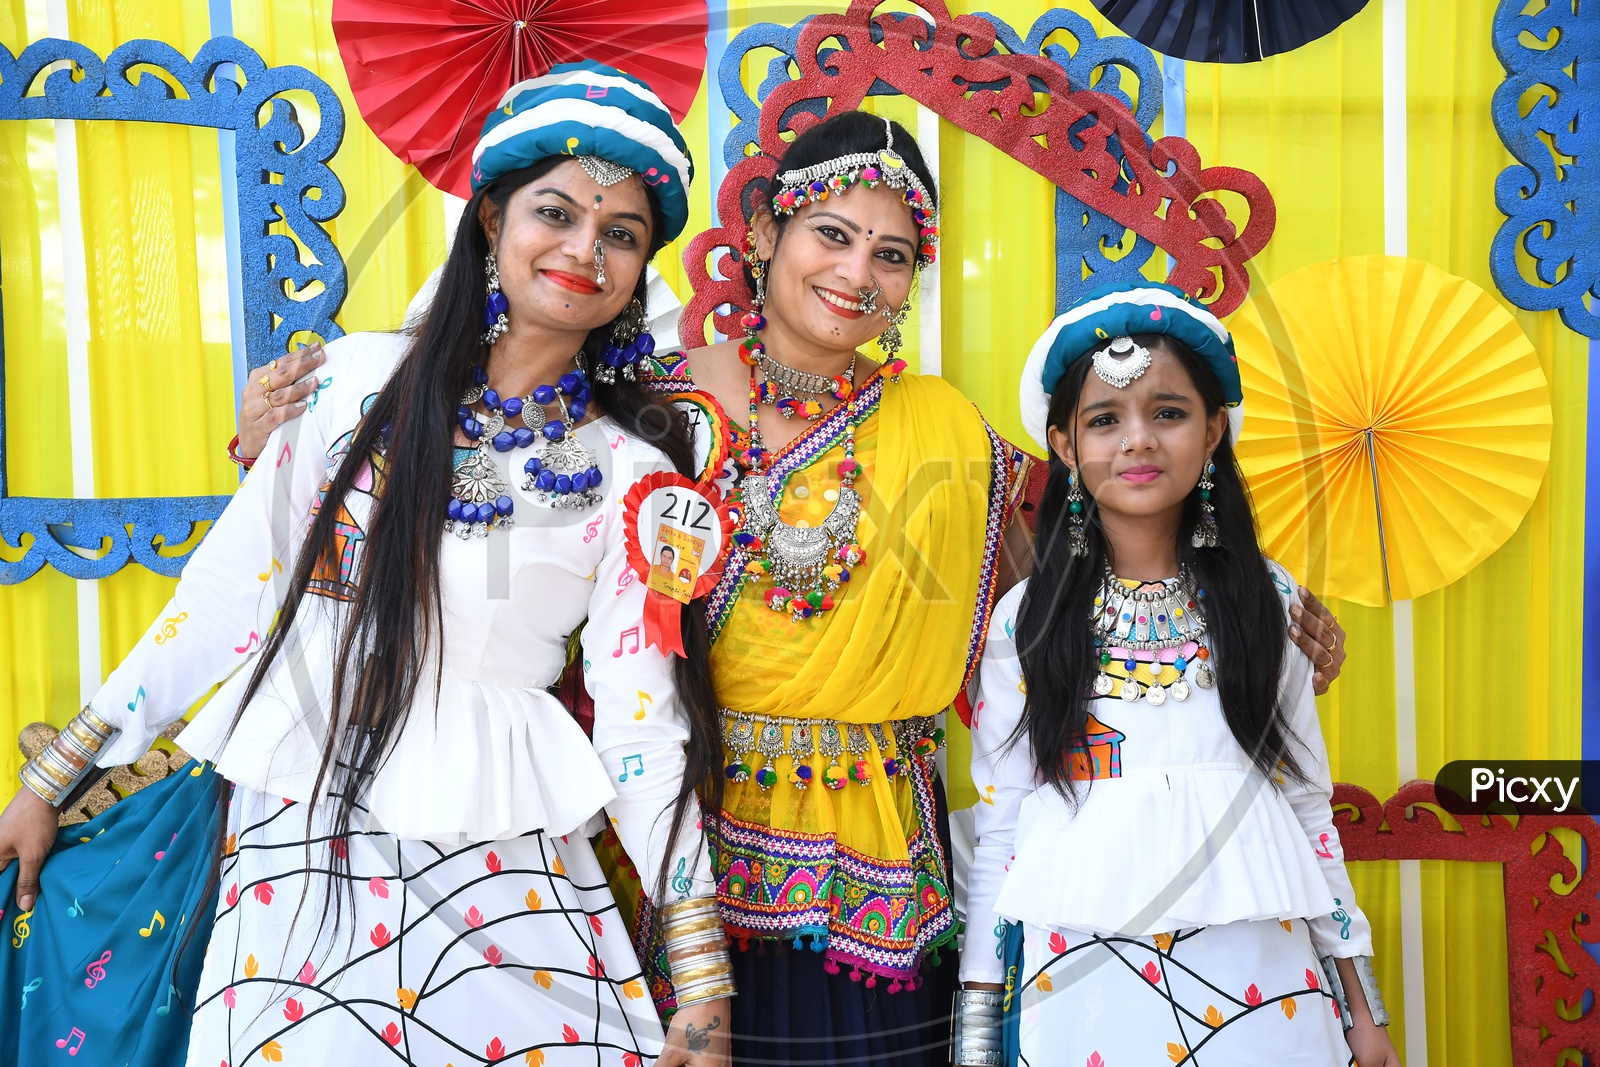 The Glamour of Traditional Indian Clothing Goes Global